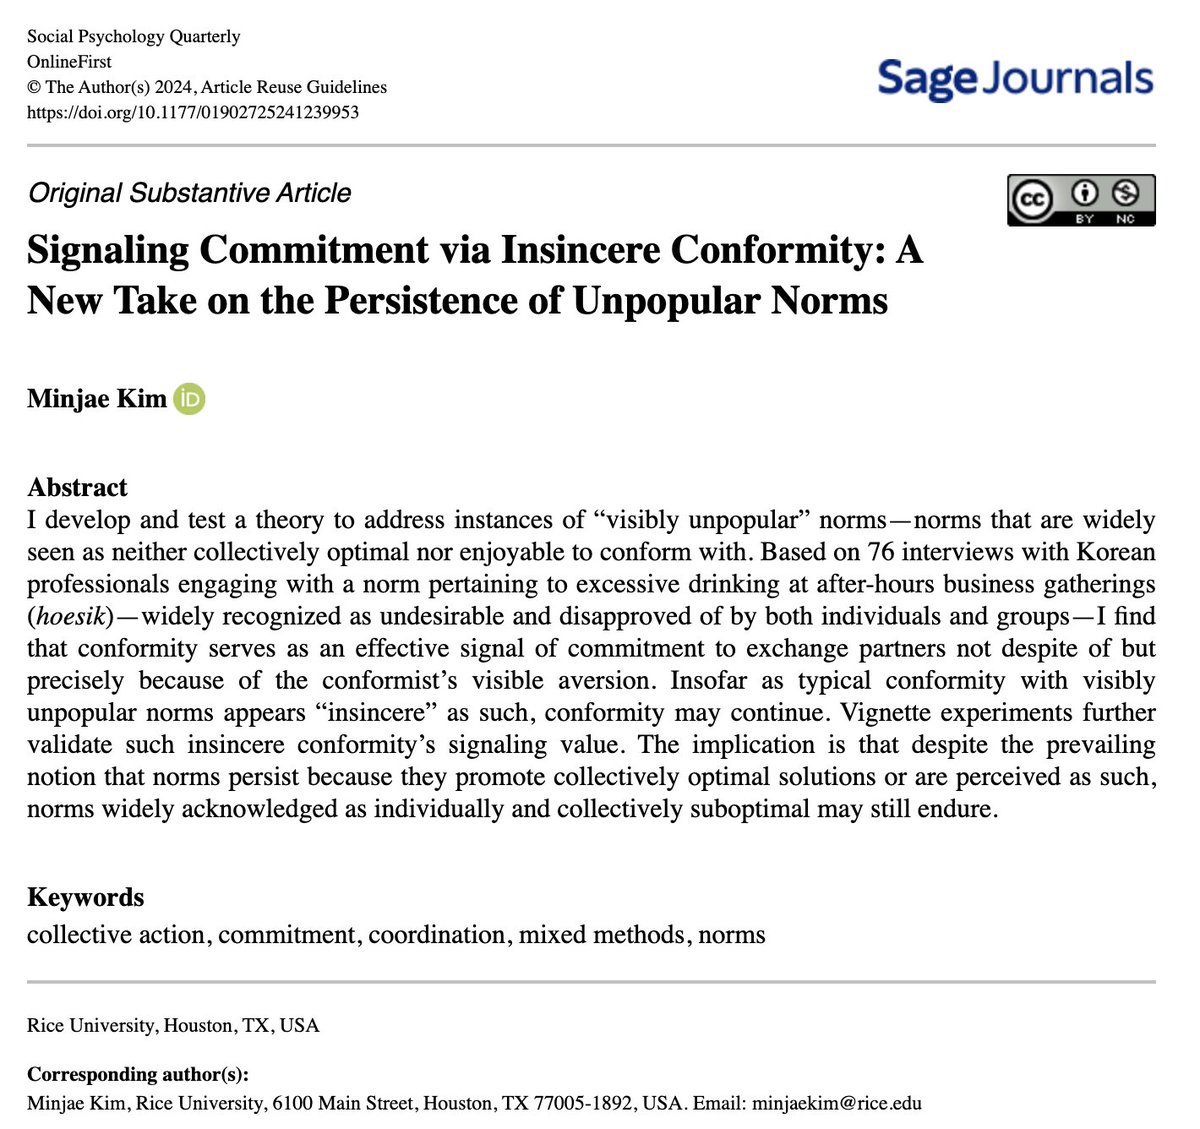 Check out our new OnlineFirst article! “Signaling Commitment via Insincere Conformity: A New Take on the Persistence of Unpopular Norms” by @minjaekim22 in #SPQ! #OpenAccess @ASASocPsych journals.sagepub.com/doi/10.1177/01…